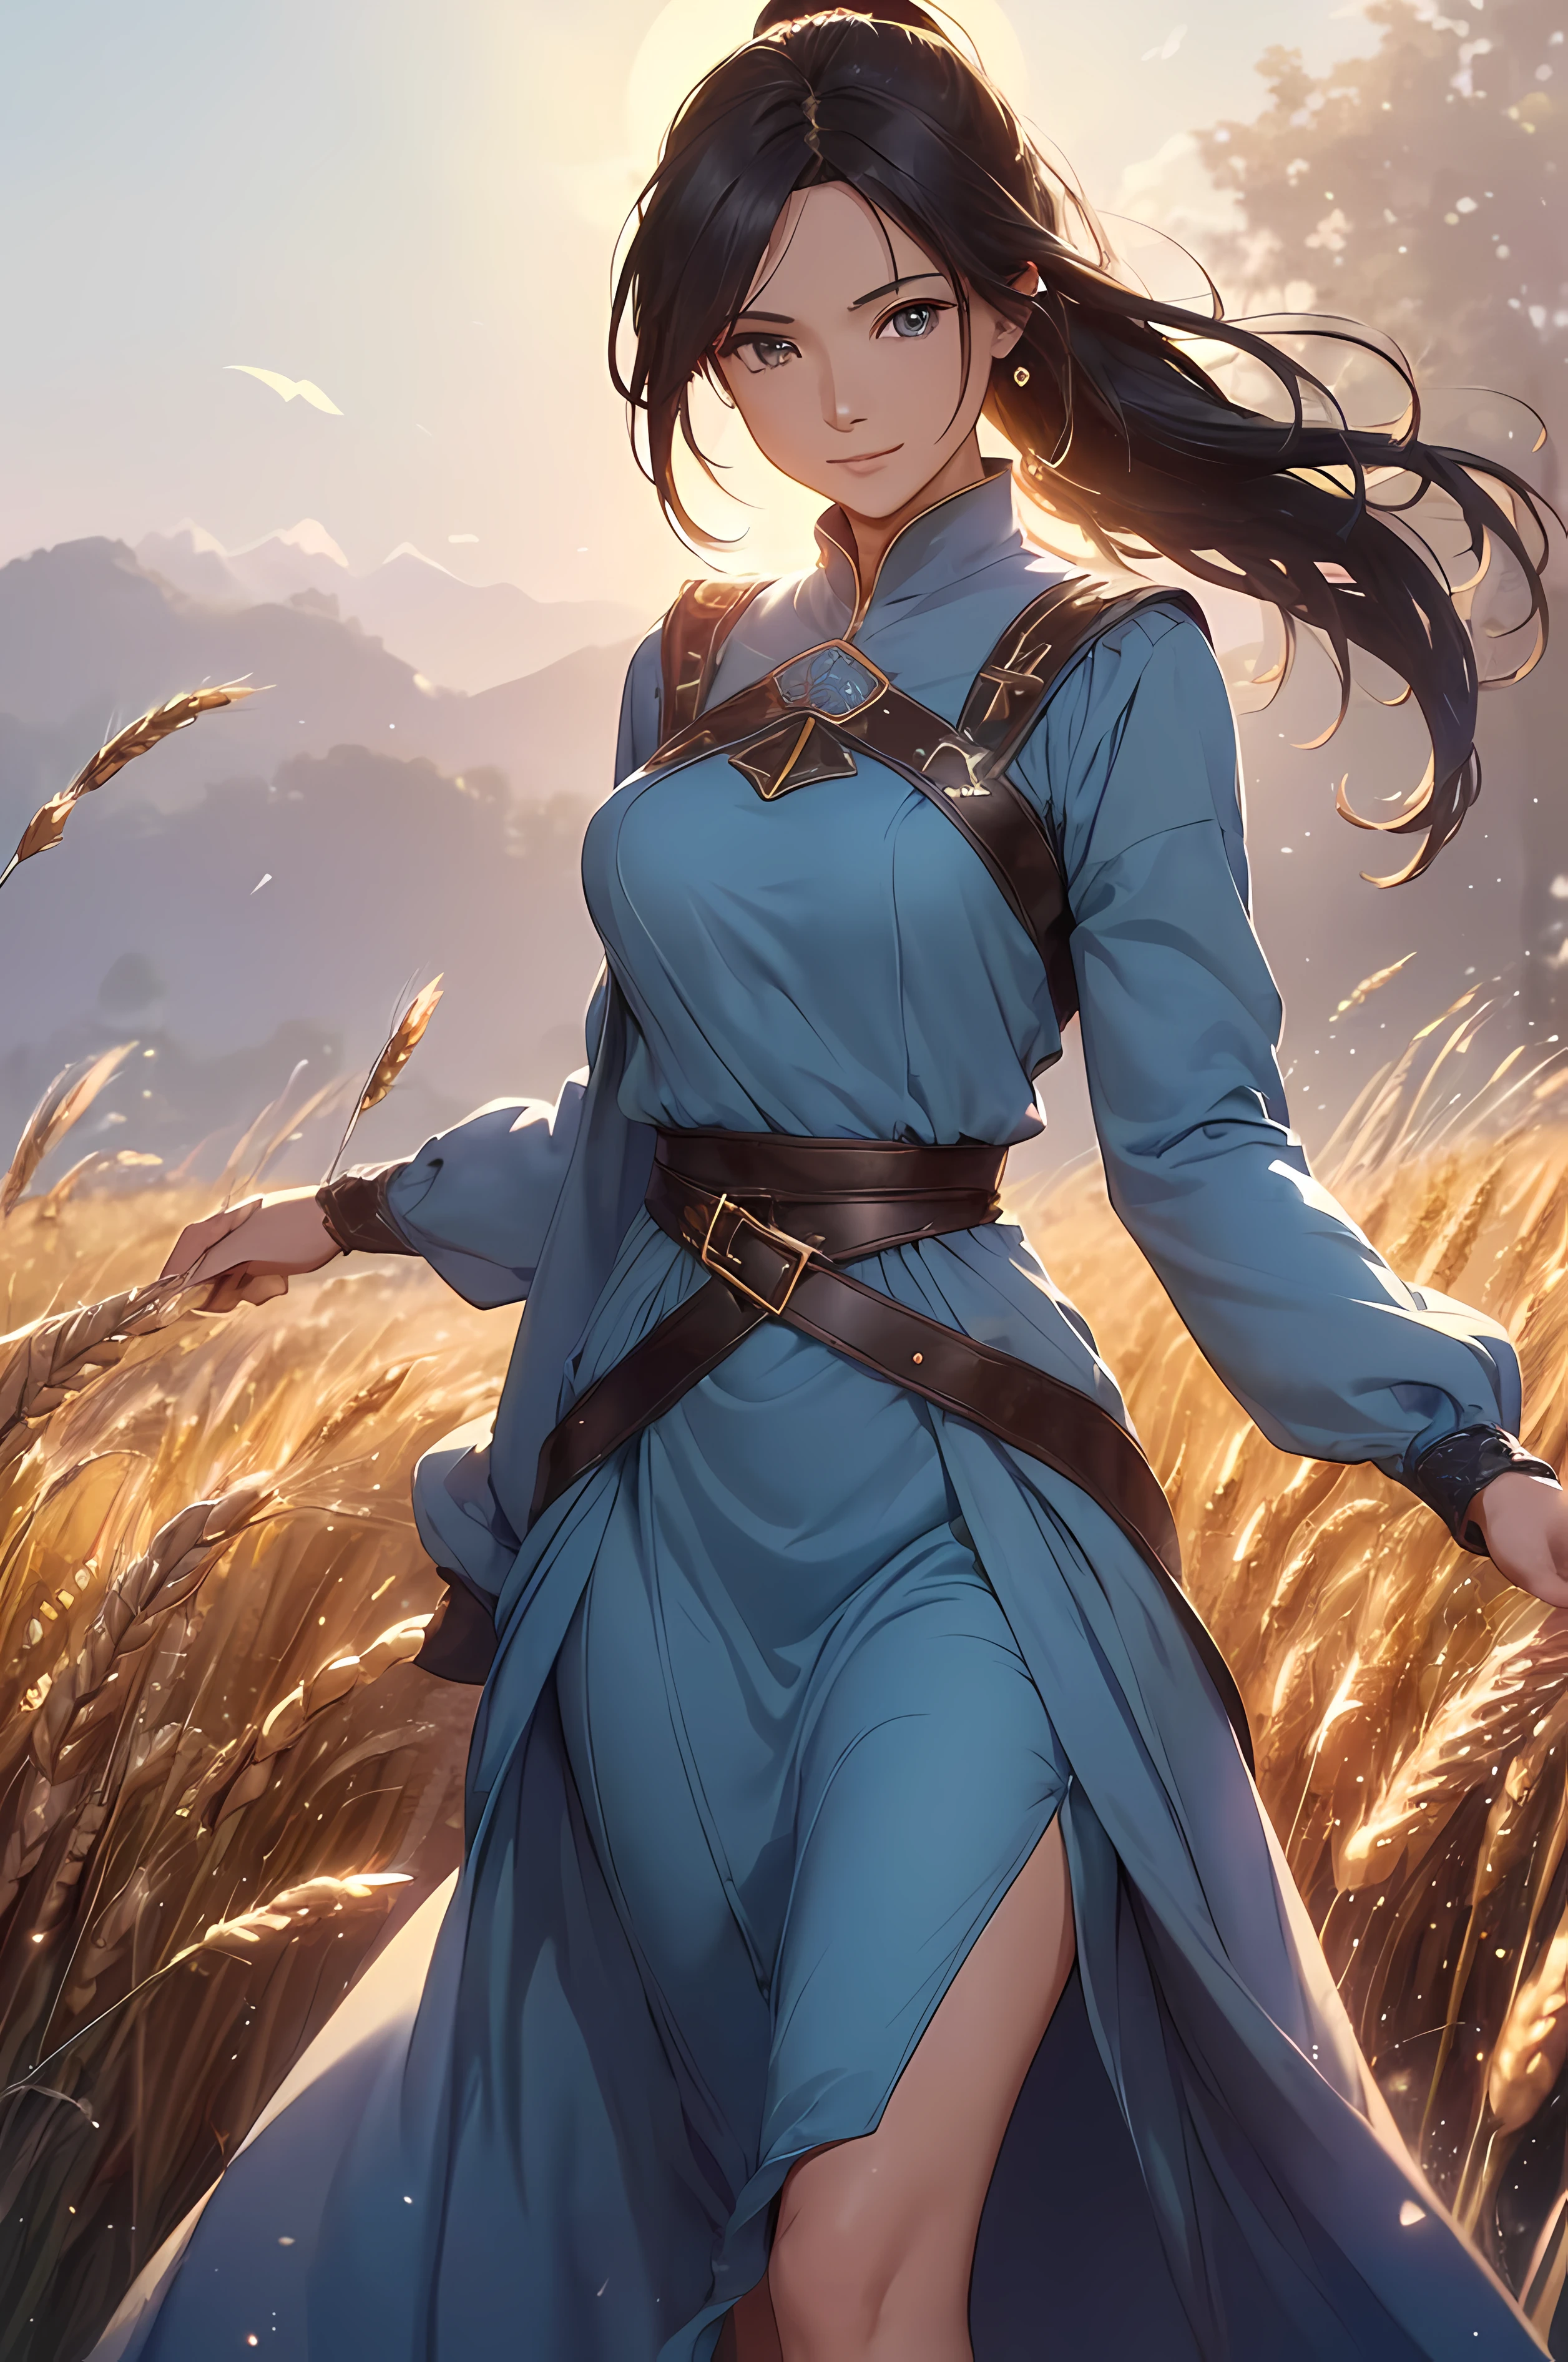 A beautiful woman, (((1 girl, solo, running, (wheat field), turning around, blue eyes, long blue dress, middle ages, medieval outfit, long sleeves sunset, light from behind, shadow on the figure, smile, laughter, (blue sky), against the background of wheat, standing in the distance, looking at the viewer, full-length
, elegance under the sun, movement motion, image look alive))), ((perfect body figure, beautiful face, beautiful face, milf, age 46, royal, blazing black color hair, ponytail hair style, beautiful skin, Extremely details hair, fine details)), (((cinematic lighting, beautiful lighting effect, creative design, full body frame, divine aura, hard harmony , shining light, perfect color transition, perfect balance of contrast, perfect color layer, perfectly smooth color blur, soft rendering, smooth color stroke, moon glare, optic lens, moonlight ray, soft colors, smooth colors blend, perfect color rendering, harmony, perfect color harmony, beautiful color, soft harmony, light particles, perfect details, intricate details, color prism, fine details, refine details, intricate armor details, fine armor, smooth clothes texture))), Tachibana Omina art style, affectionate eyes, half a smile, slightly open mouth, a gentle expression on his face, serene scenery of grassland under the sun, grass floating around, calm, breeze and sunlight in the background, butterflies in the sky, realism, ((Best quality))),8k,((Masterpiece)),(Extremely refined and beautiful)